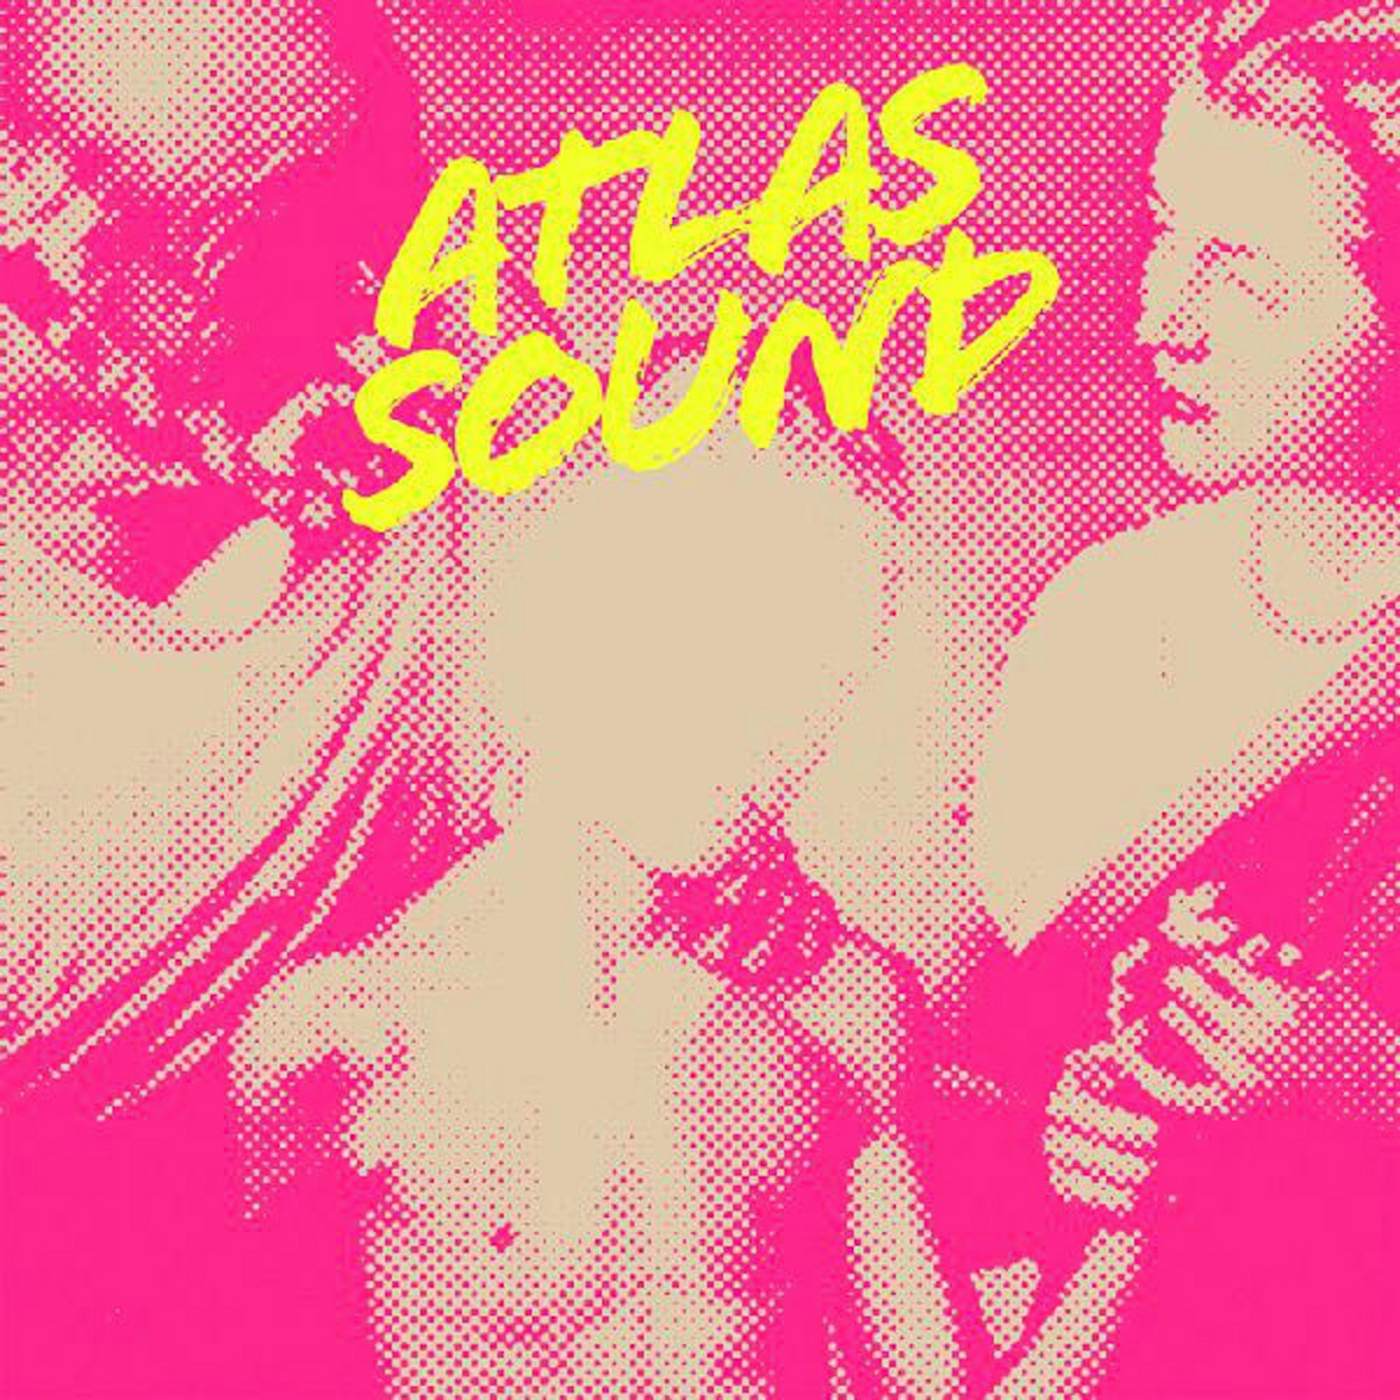 Atlas Sound LET THE BLIND LEAD THOSE WHO SEE BUT CANNOT FEEL Vinyl Record